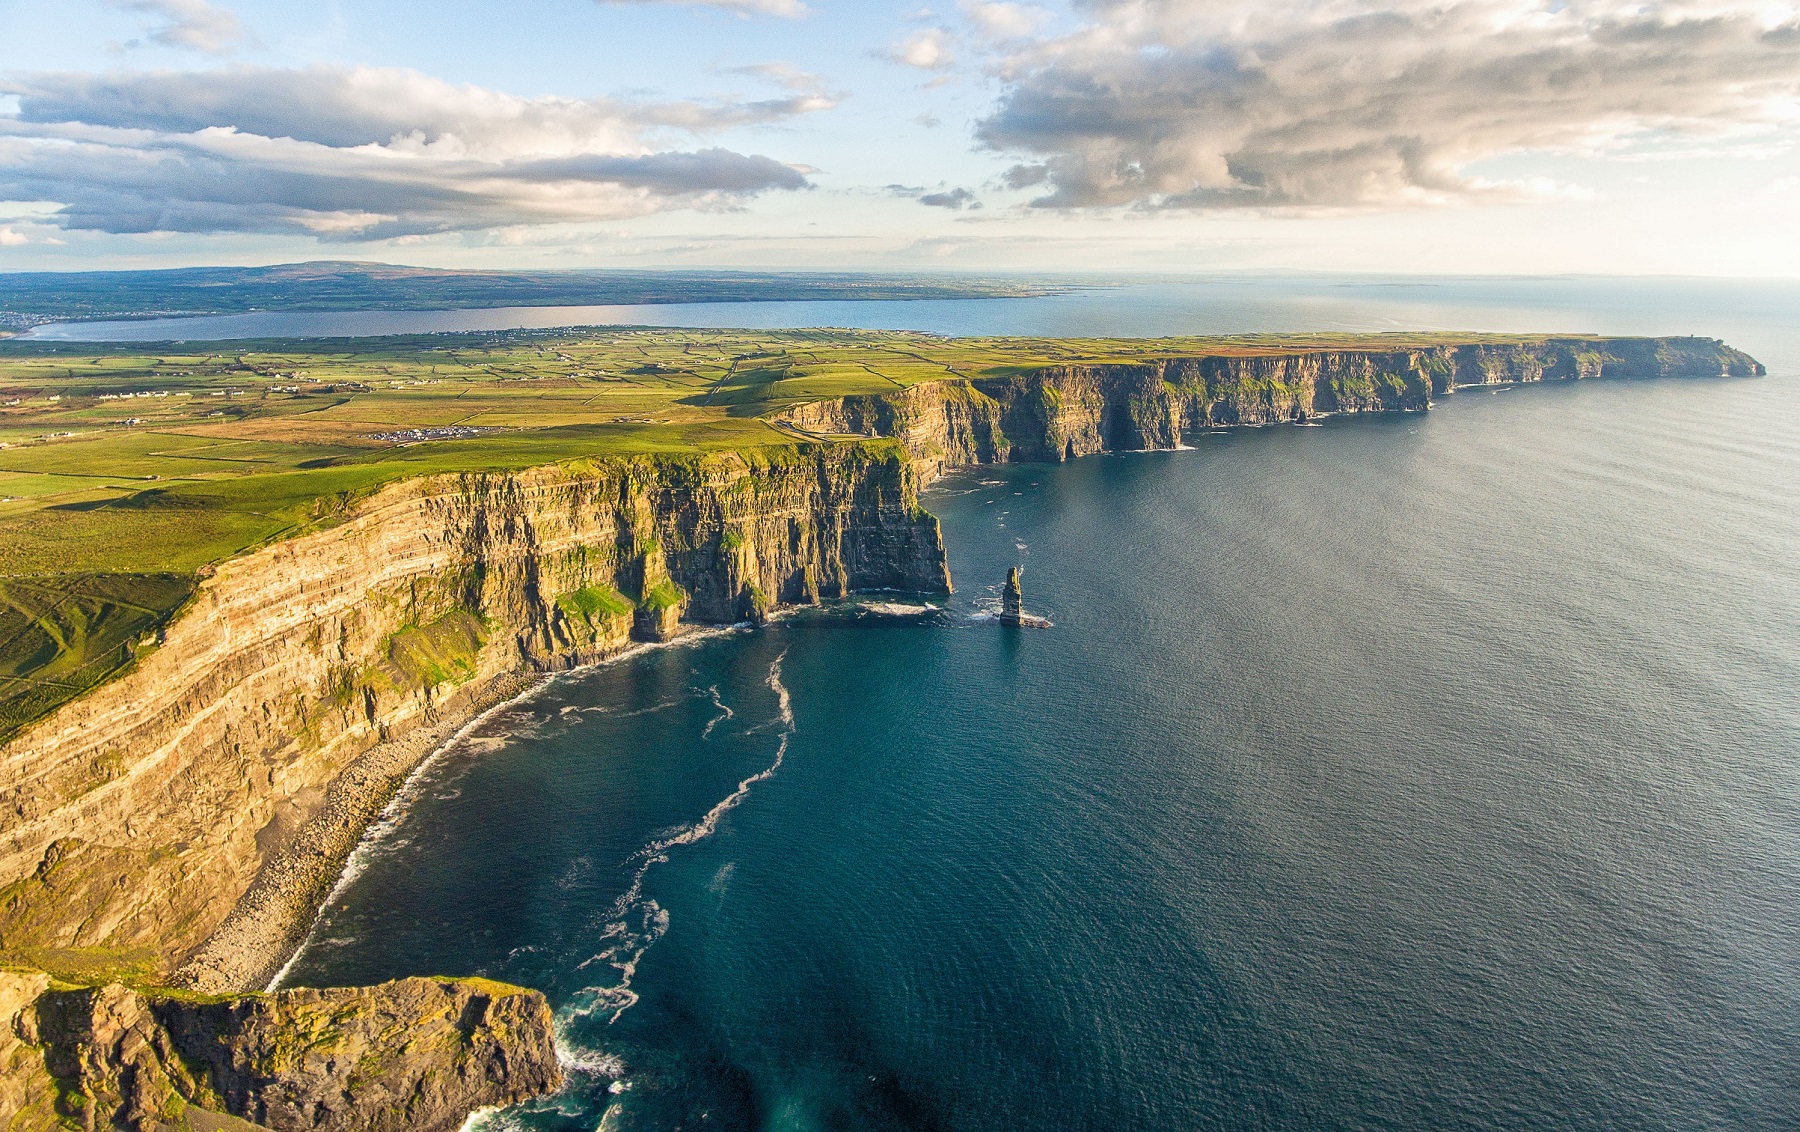 Galway + Cliffs of Moher